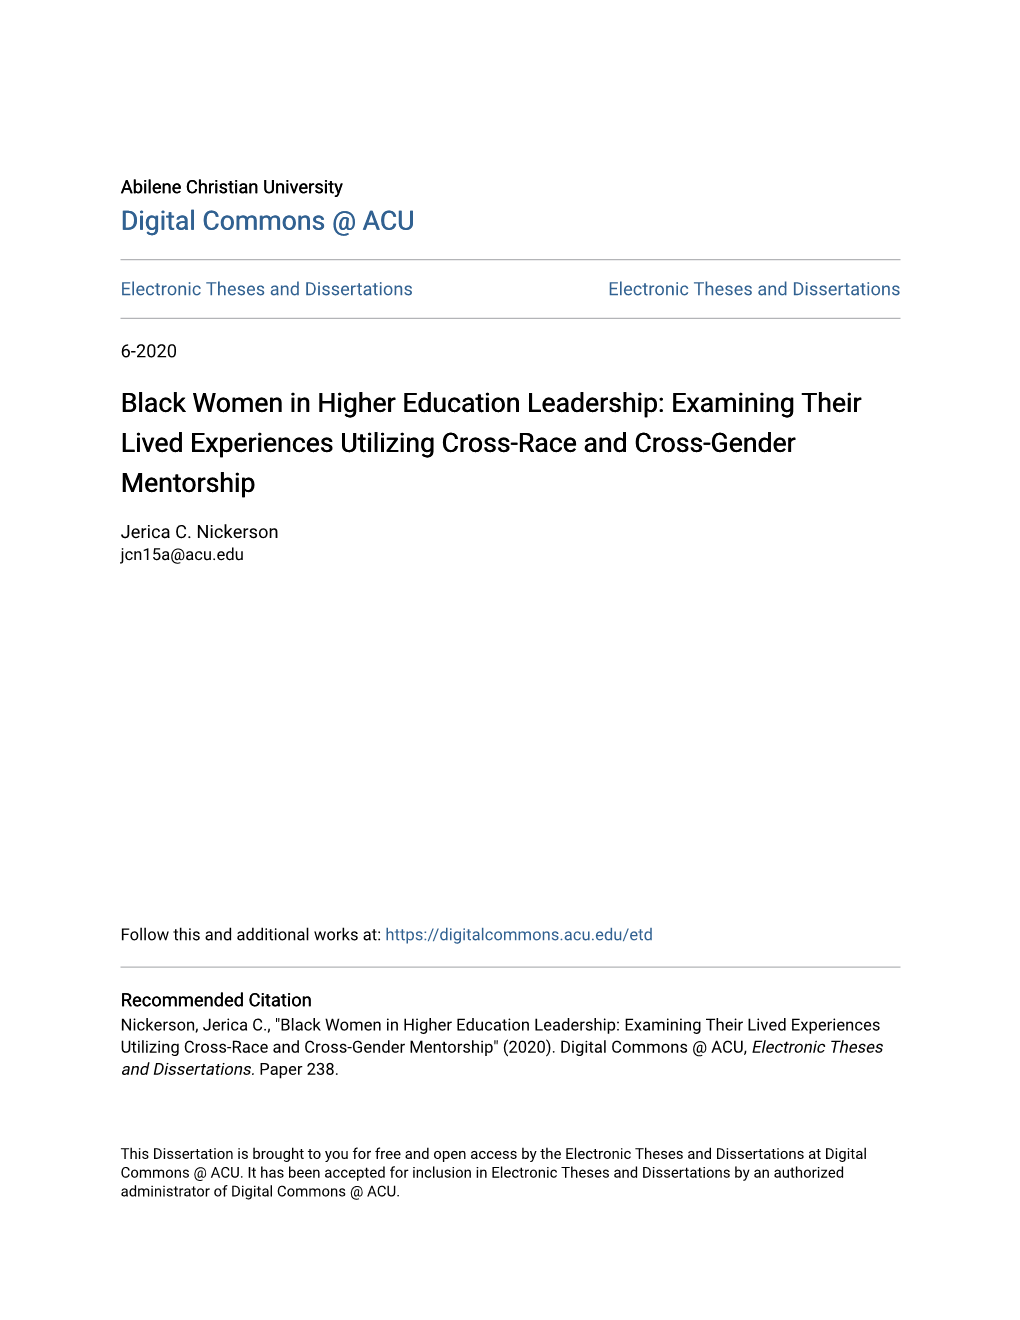 Black Women in Higher Education Leadership: Examining Their Lived Experiences Utilizing Cross-Race and Cross-Gender Mentorship